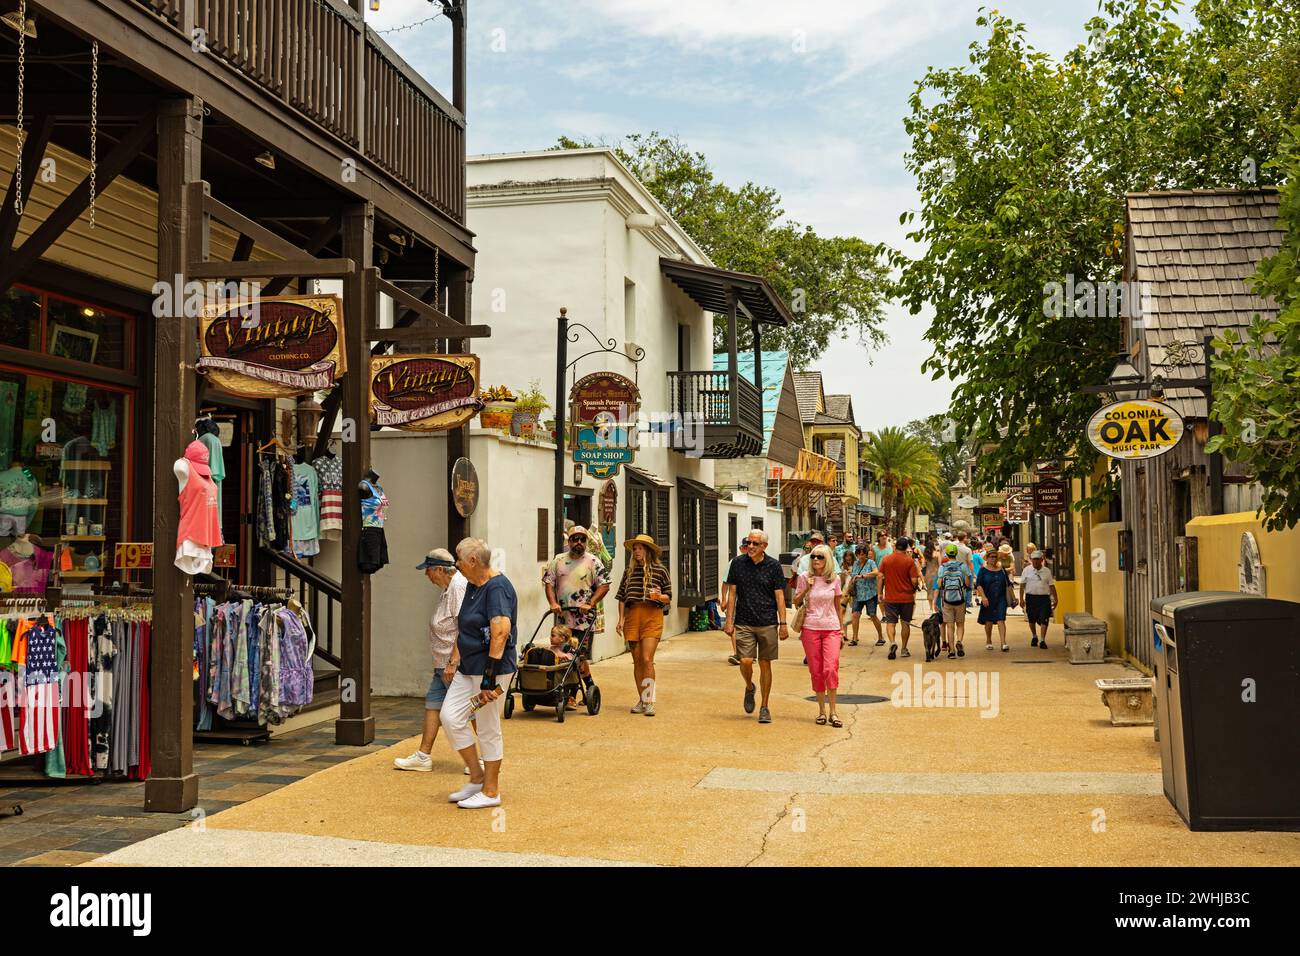 Downtown Saint Augustine the oldest european foundet town in america Stock Photo